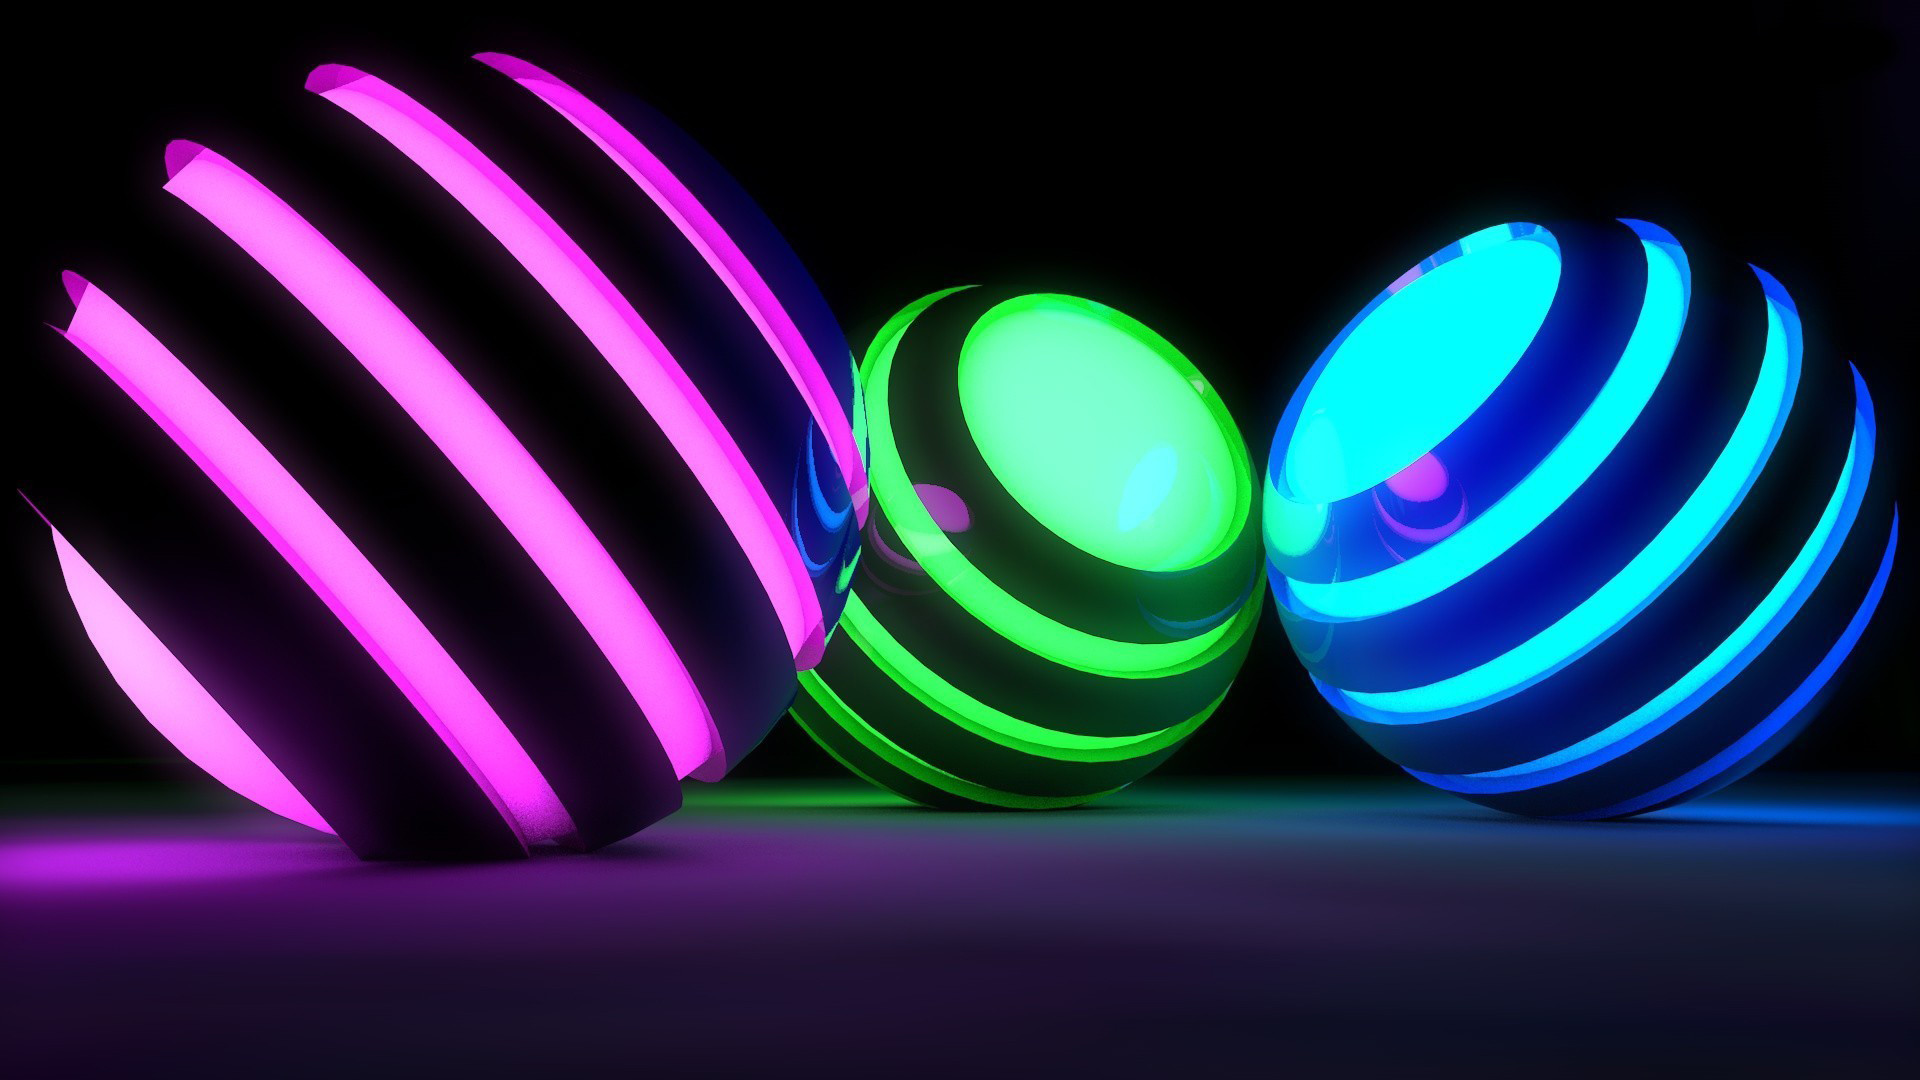 Neon Wallpapers Find best latest Neon Wallpapers in HD for your PC desktop background